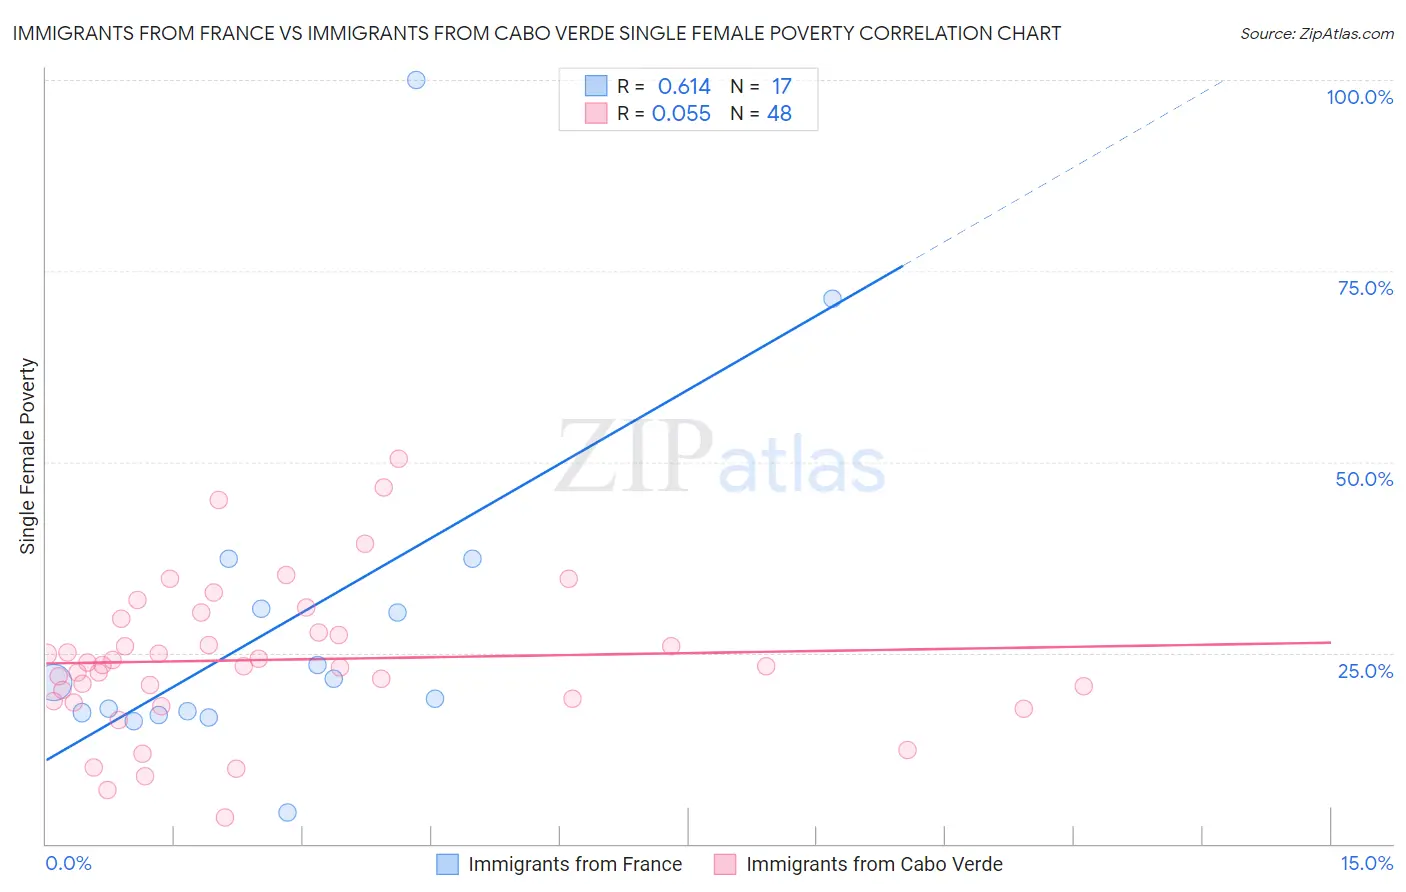 Immigrants from France vs Immigrants from Cabo Verde Single Female Poverty